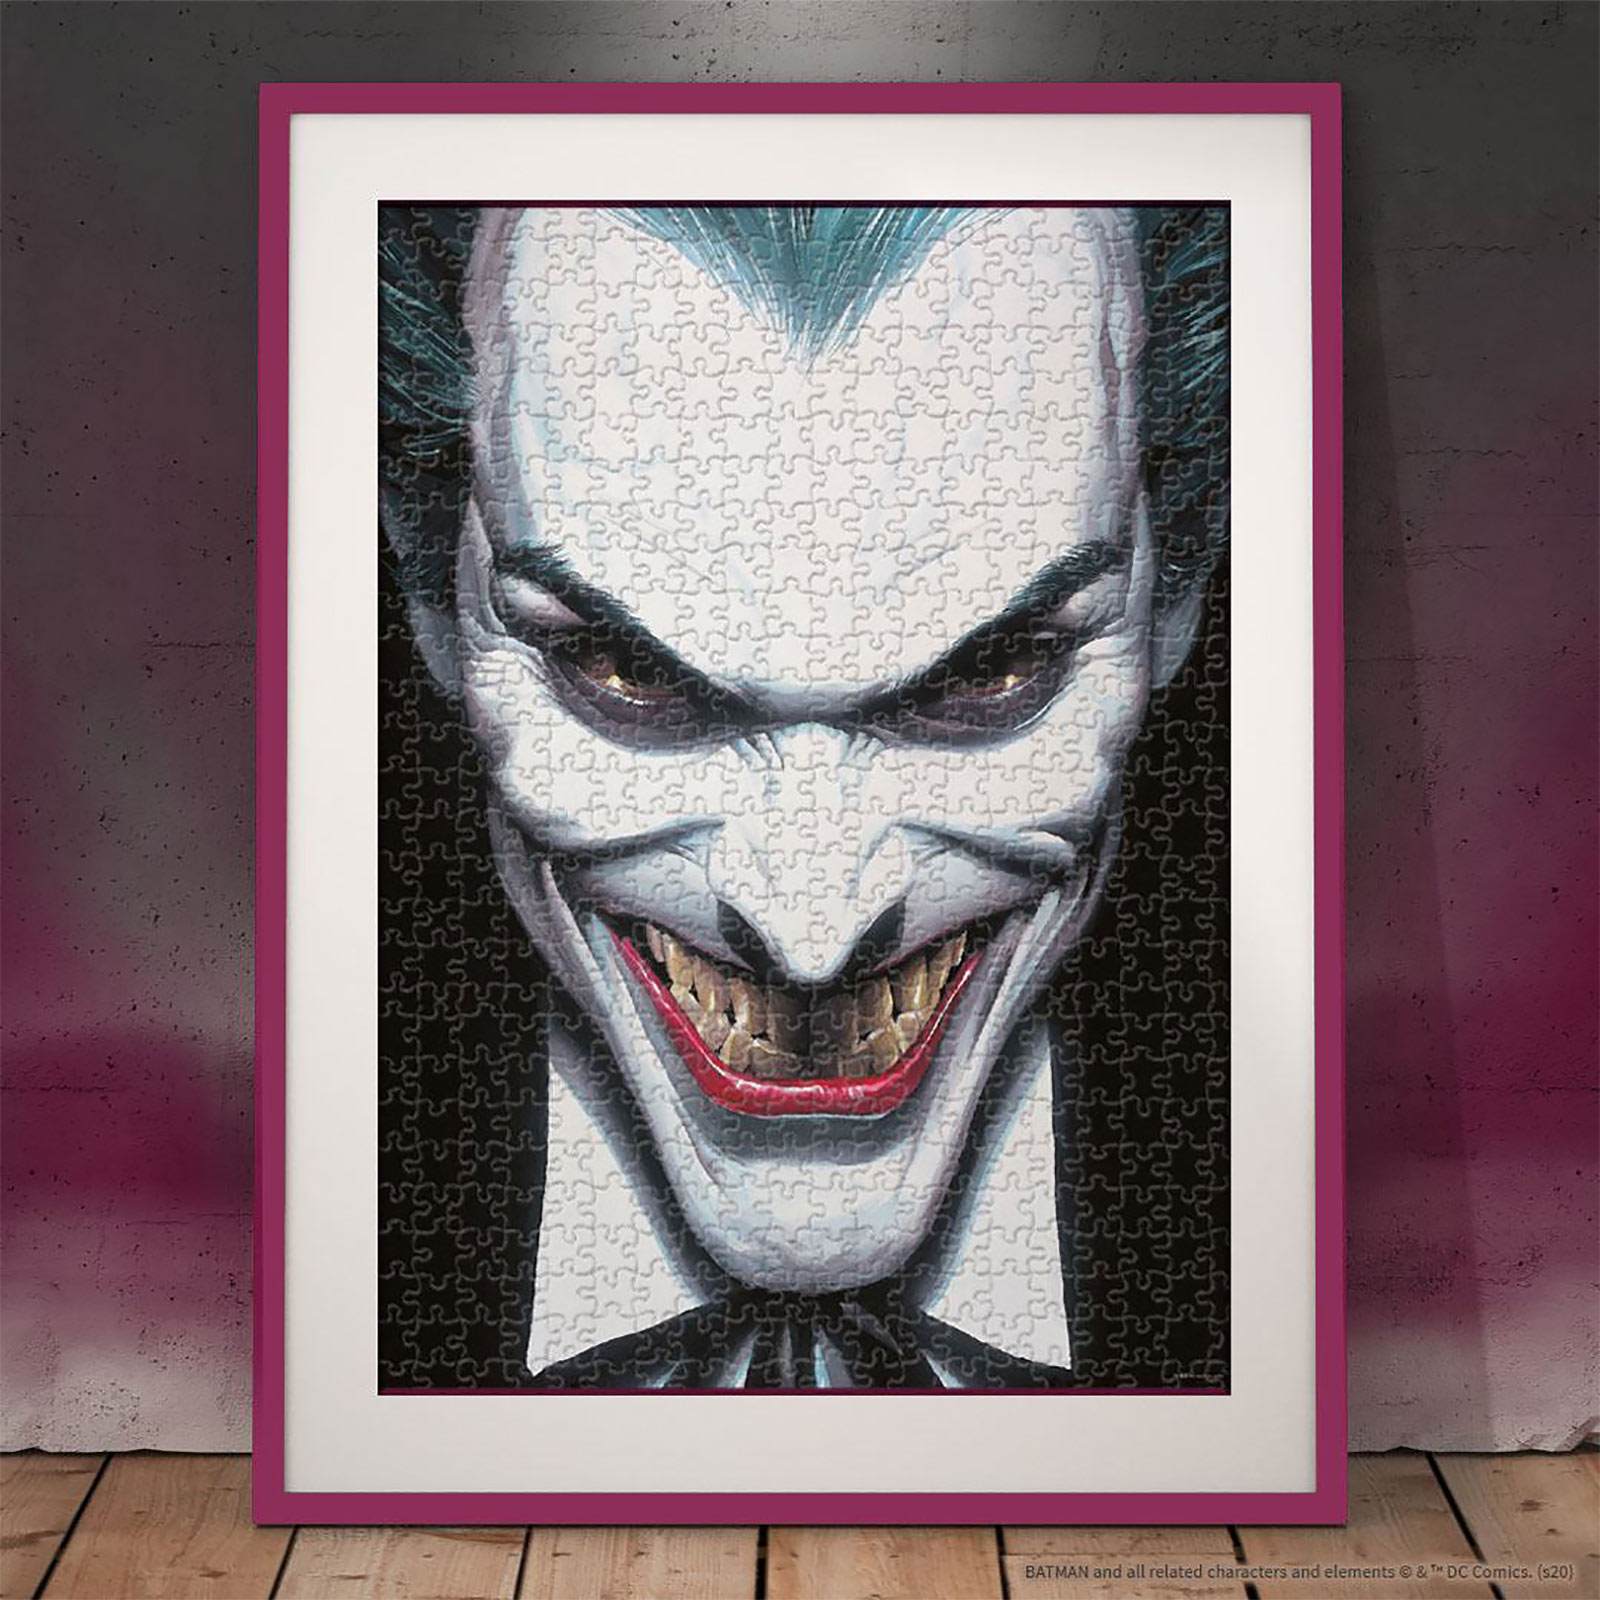 Joker - Prince of Crime Puzzle